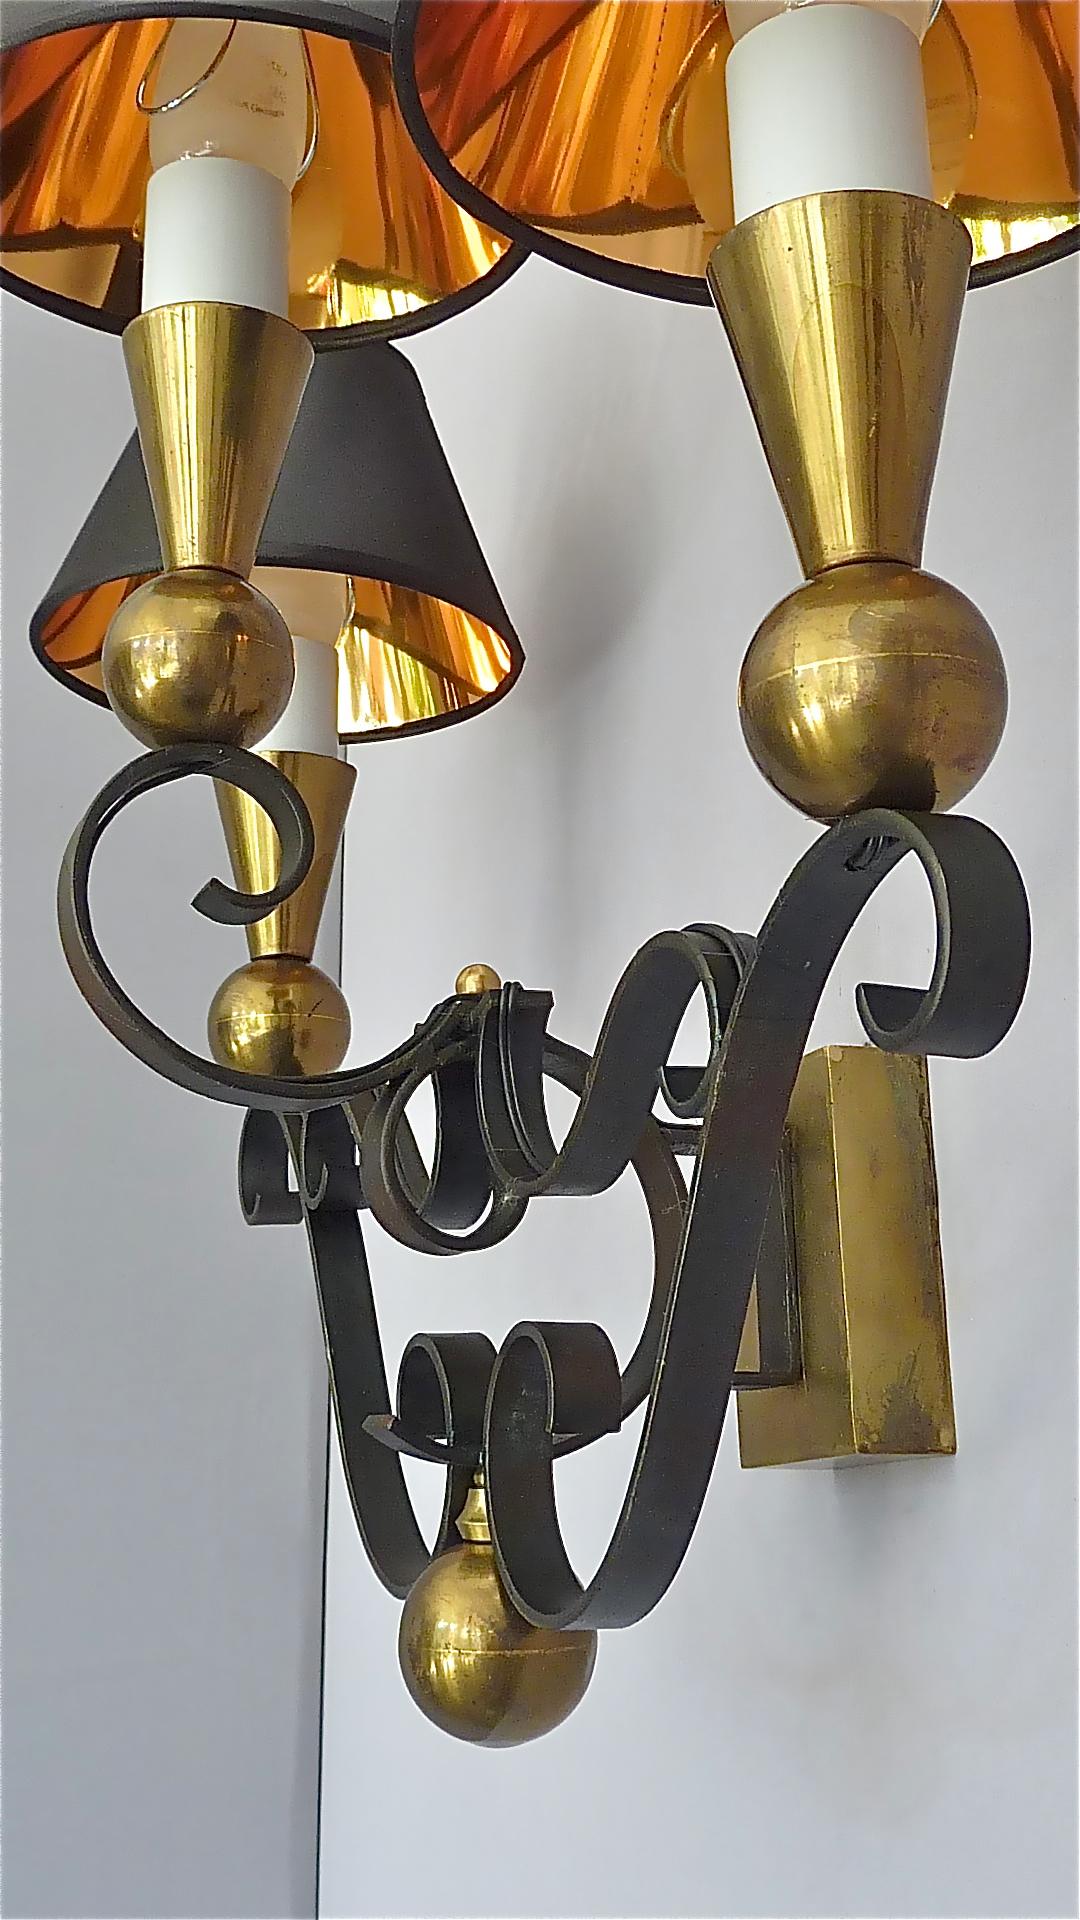 3 Rare Sconces Poillerat Adnet Style Black Forged Iron Brass Gold France 1950s For Sale 4